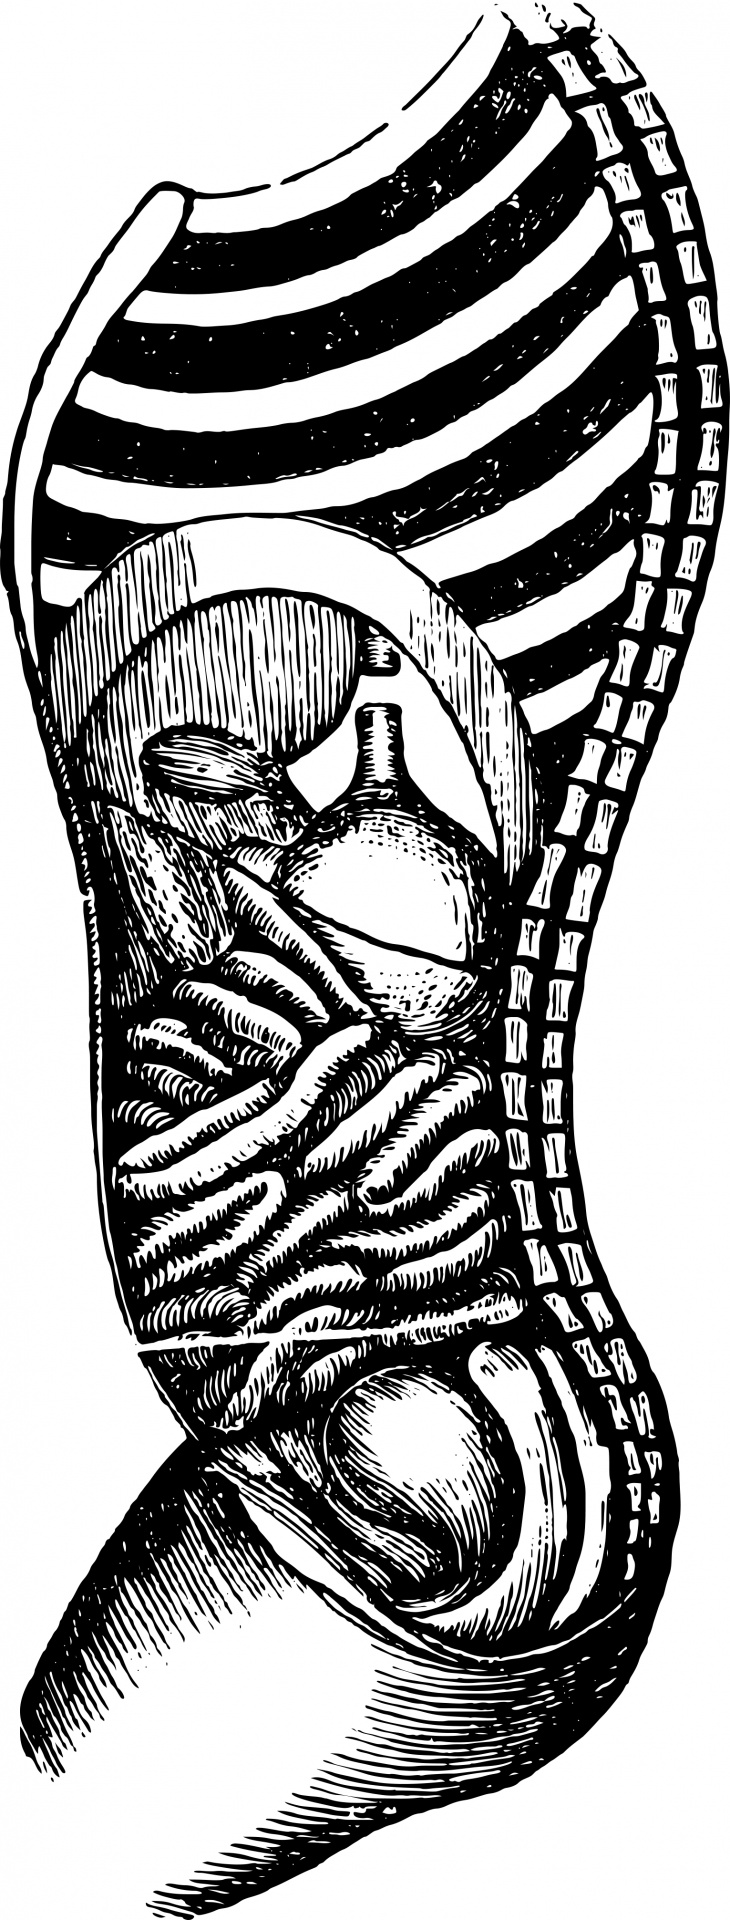 Re digitized vintage public domain illustration of a black and white human internal organs.